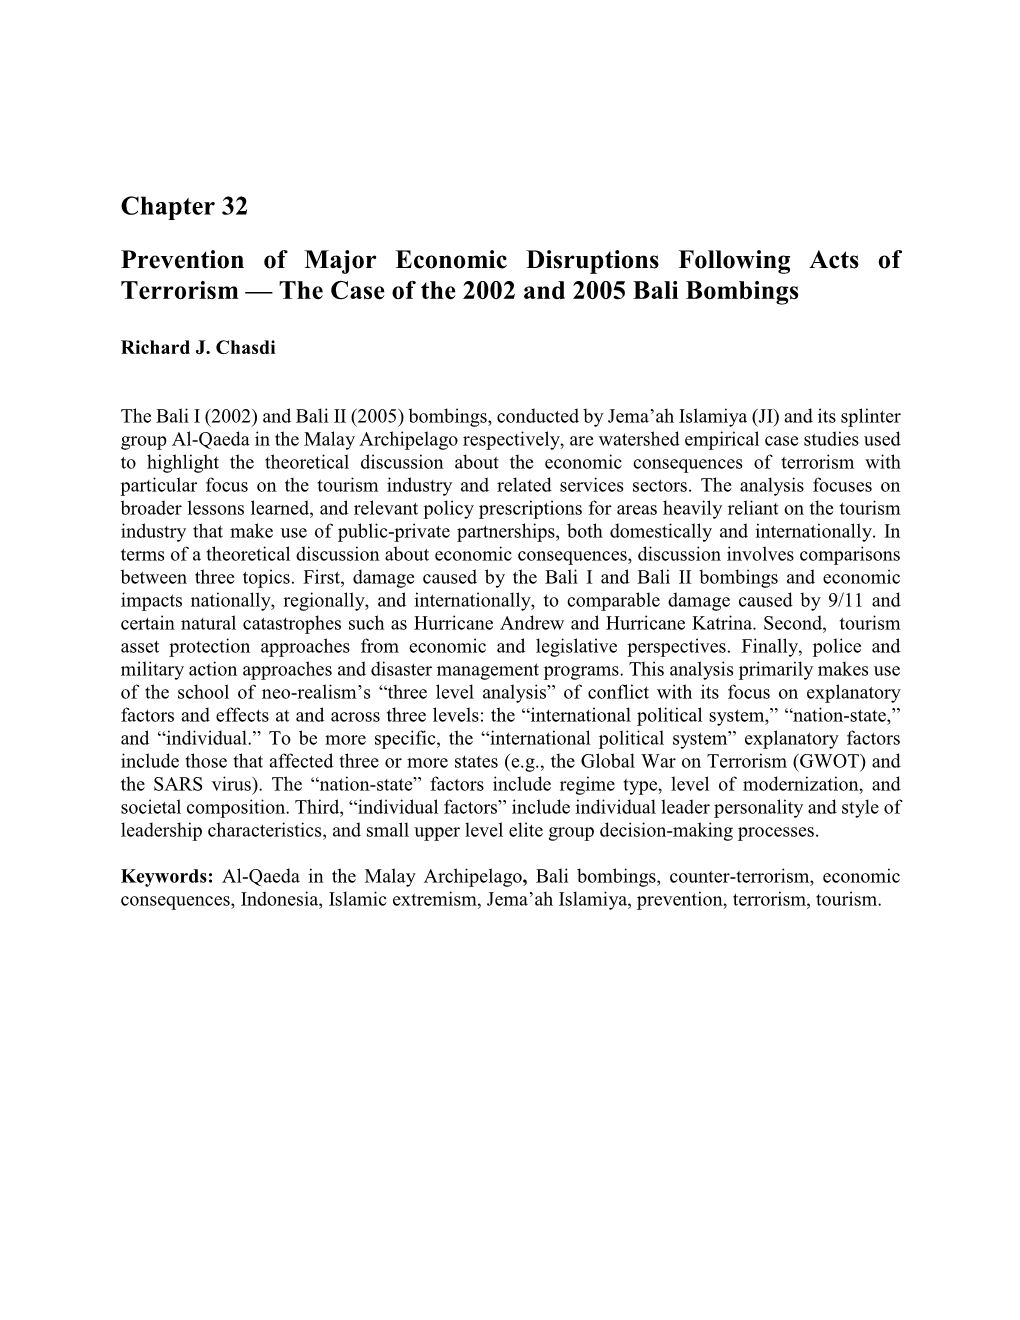 Chapter 32 Prevention of Major Economic Disruptions Following Acts of Terrorism — the Case of the 2002 and 2005 Bali Bombings